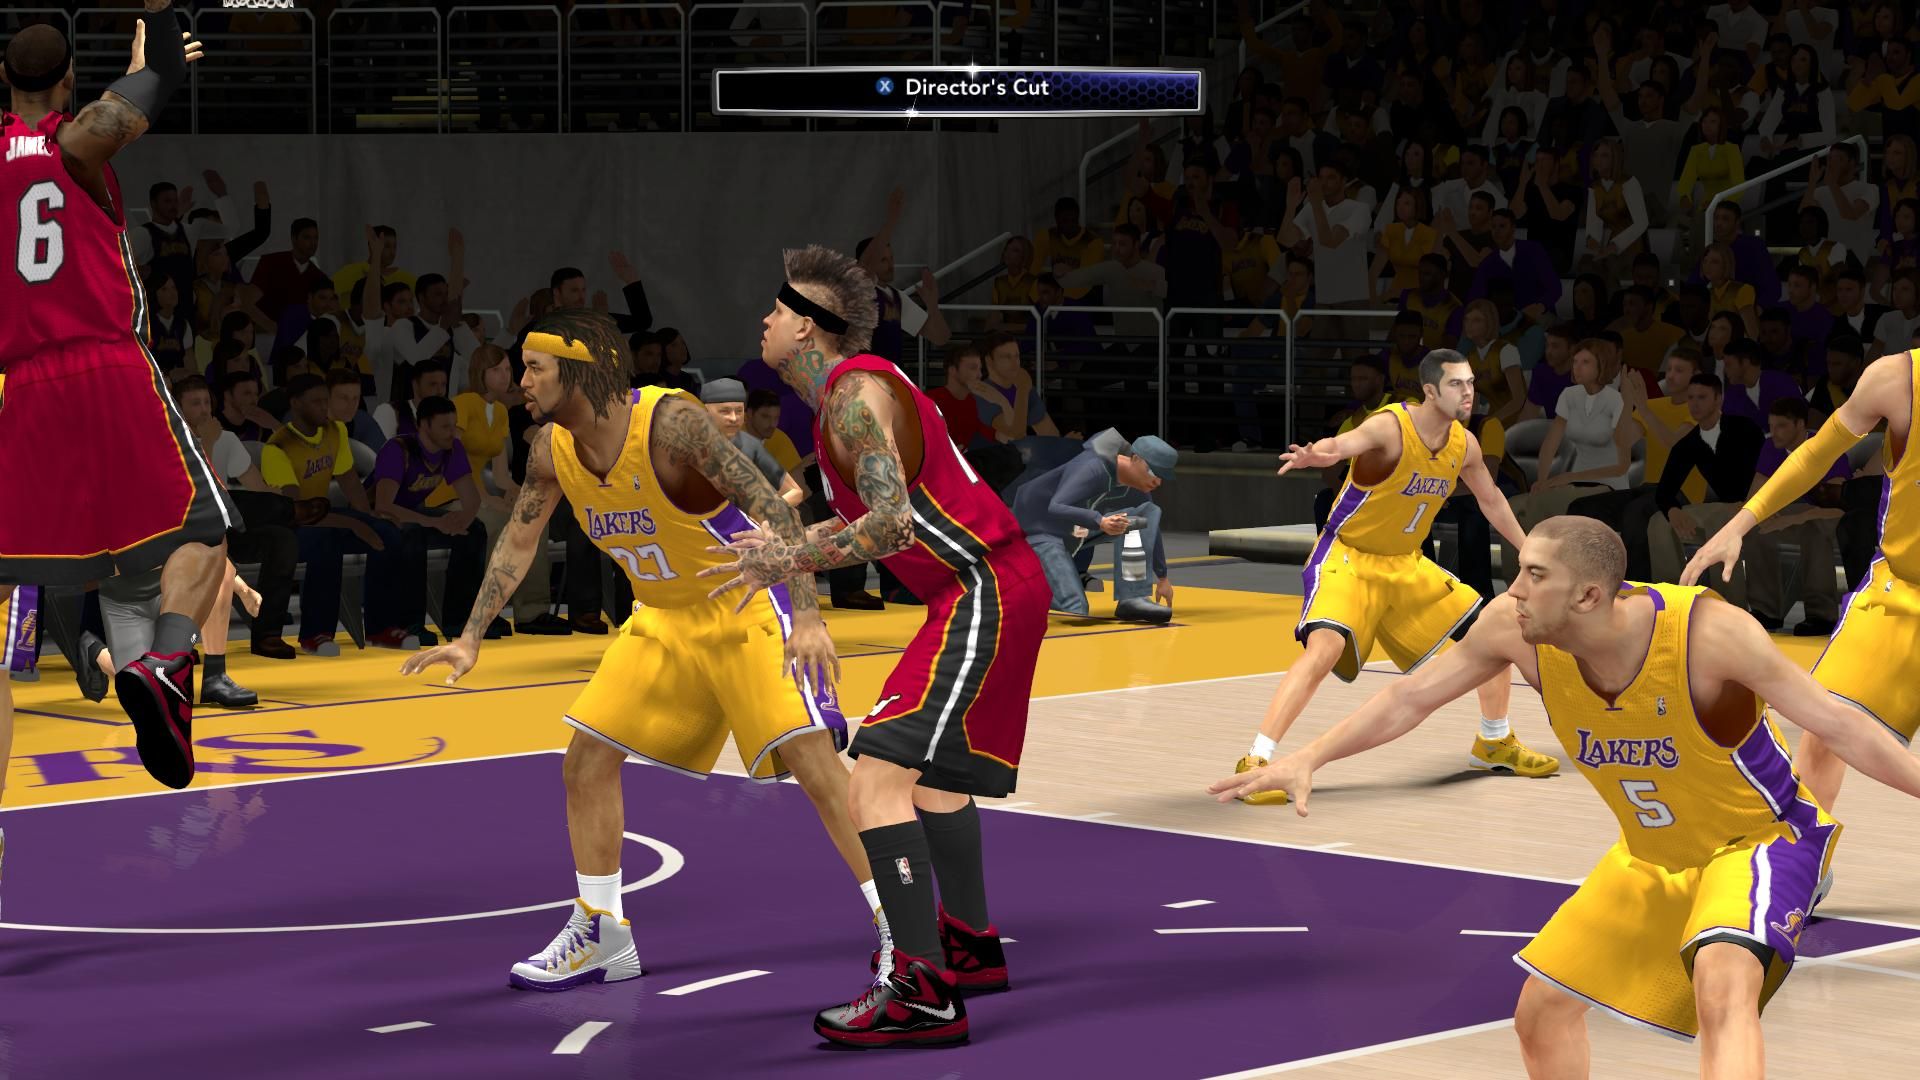 tight jersey cloth file with reg exe.please back up files - NBA 2K14 at